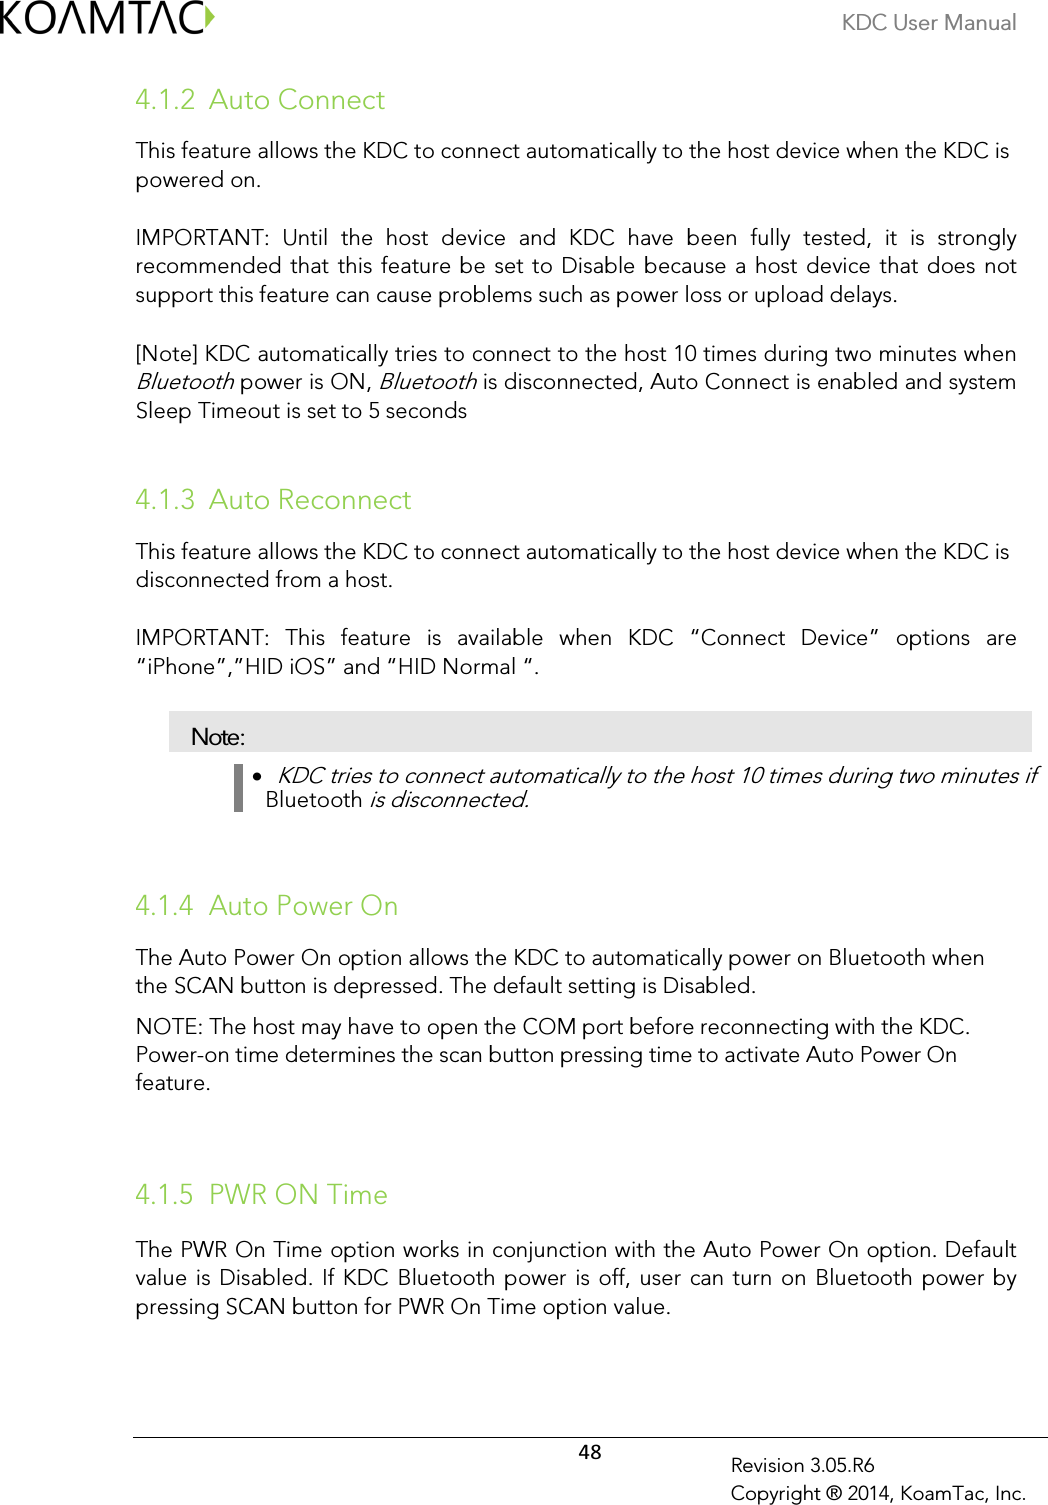 KDC User Manual  48 Revision 3.05.R6 Copyright ® 2014, KoamTac, Inc. 4.1.2 Auto Connect  This feature allows the KDC to connect automatically to the host device when the KDC is powered on.   IMPORTANT:  Until  the  host  device  and  KDC  have  been  fully  tested,  it  is  strongly recommended that  this  feature be  set to Disable because a  host device  that does not support this feature can cause problems such as power loss or upload delays.   [Note] KDC automatically tries to connect to the host 10 times during two minutes when Bluetooth power is ON, Bluetooth is disconnected, Auto Connect is enabled and system Sleep Timeout is set to 5 seconds   4.1.3 Auto Reconnect  This feature allows the KDC to connect automatically to the host device when the KDC is disconnected from a host.   IMPORTANT:  This  feature  is  available  when  KDC  “Connect  Device”  options  are “iPhone”,”HID iOS” and “HID Normal “.  Note: •   KDC tries to connect automatically to the host 10 times during two minutes if Bluetooth is disconnected.   4.1.4 Auto Power On  The Auto Power On option allows the KDC to automatically power on Bluetooth when the SCAN button is depressed. The default setting is Disabled.   NOTE: The host may have to open the COM port before reconnecting with the KDC.  Power-on time determines the scan button pressing time to activate Auto Power On feature.   4.1.5 PWR ON Time The PWR On Time option works in conjunction with the Auto Power On option. Default value is  Disabled.  If KDC  Bluetooth power is  off,  user can turn on Bluetooth power by pressing SCAN button for PWR On Time option value.  